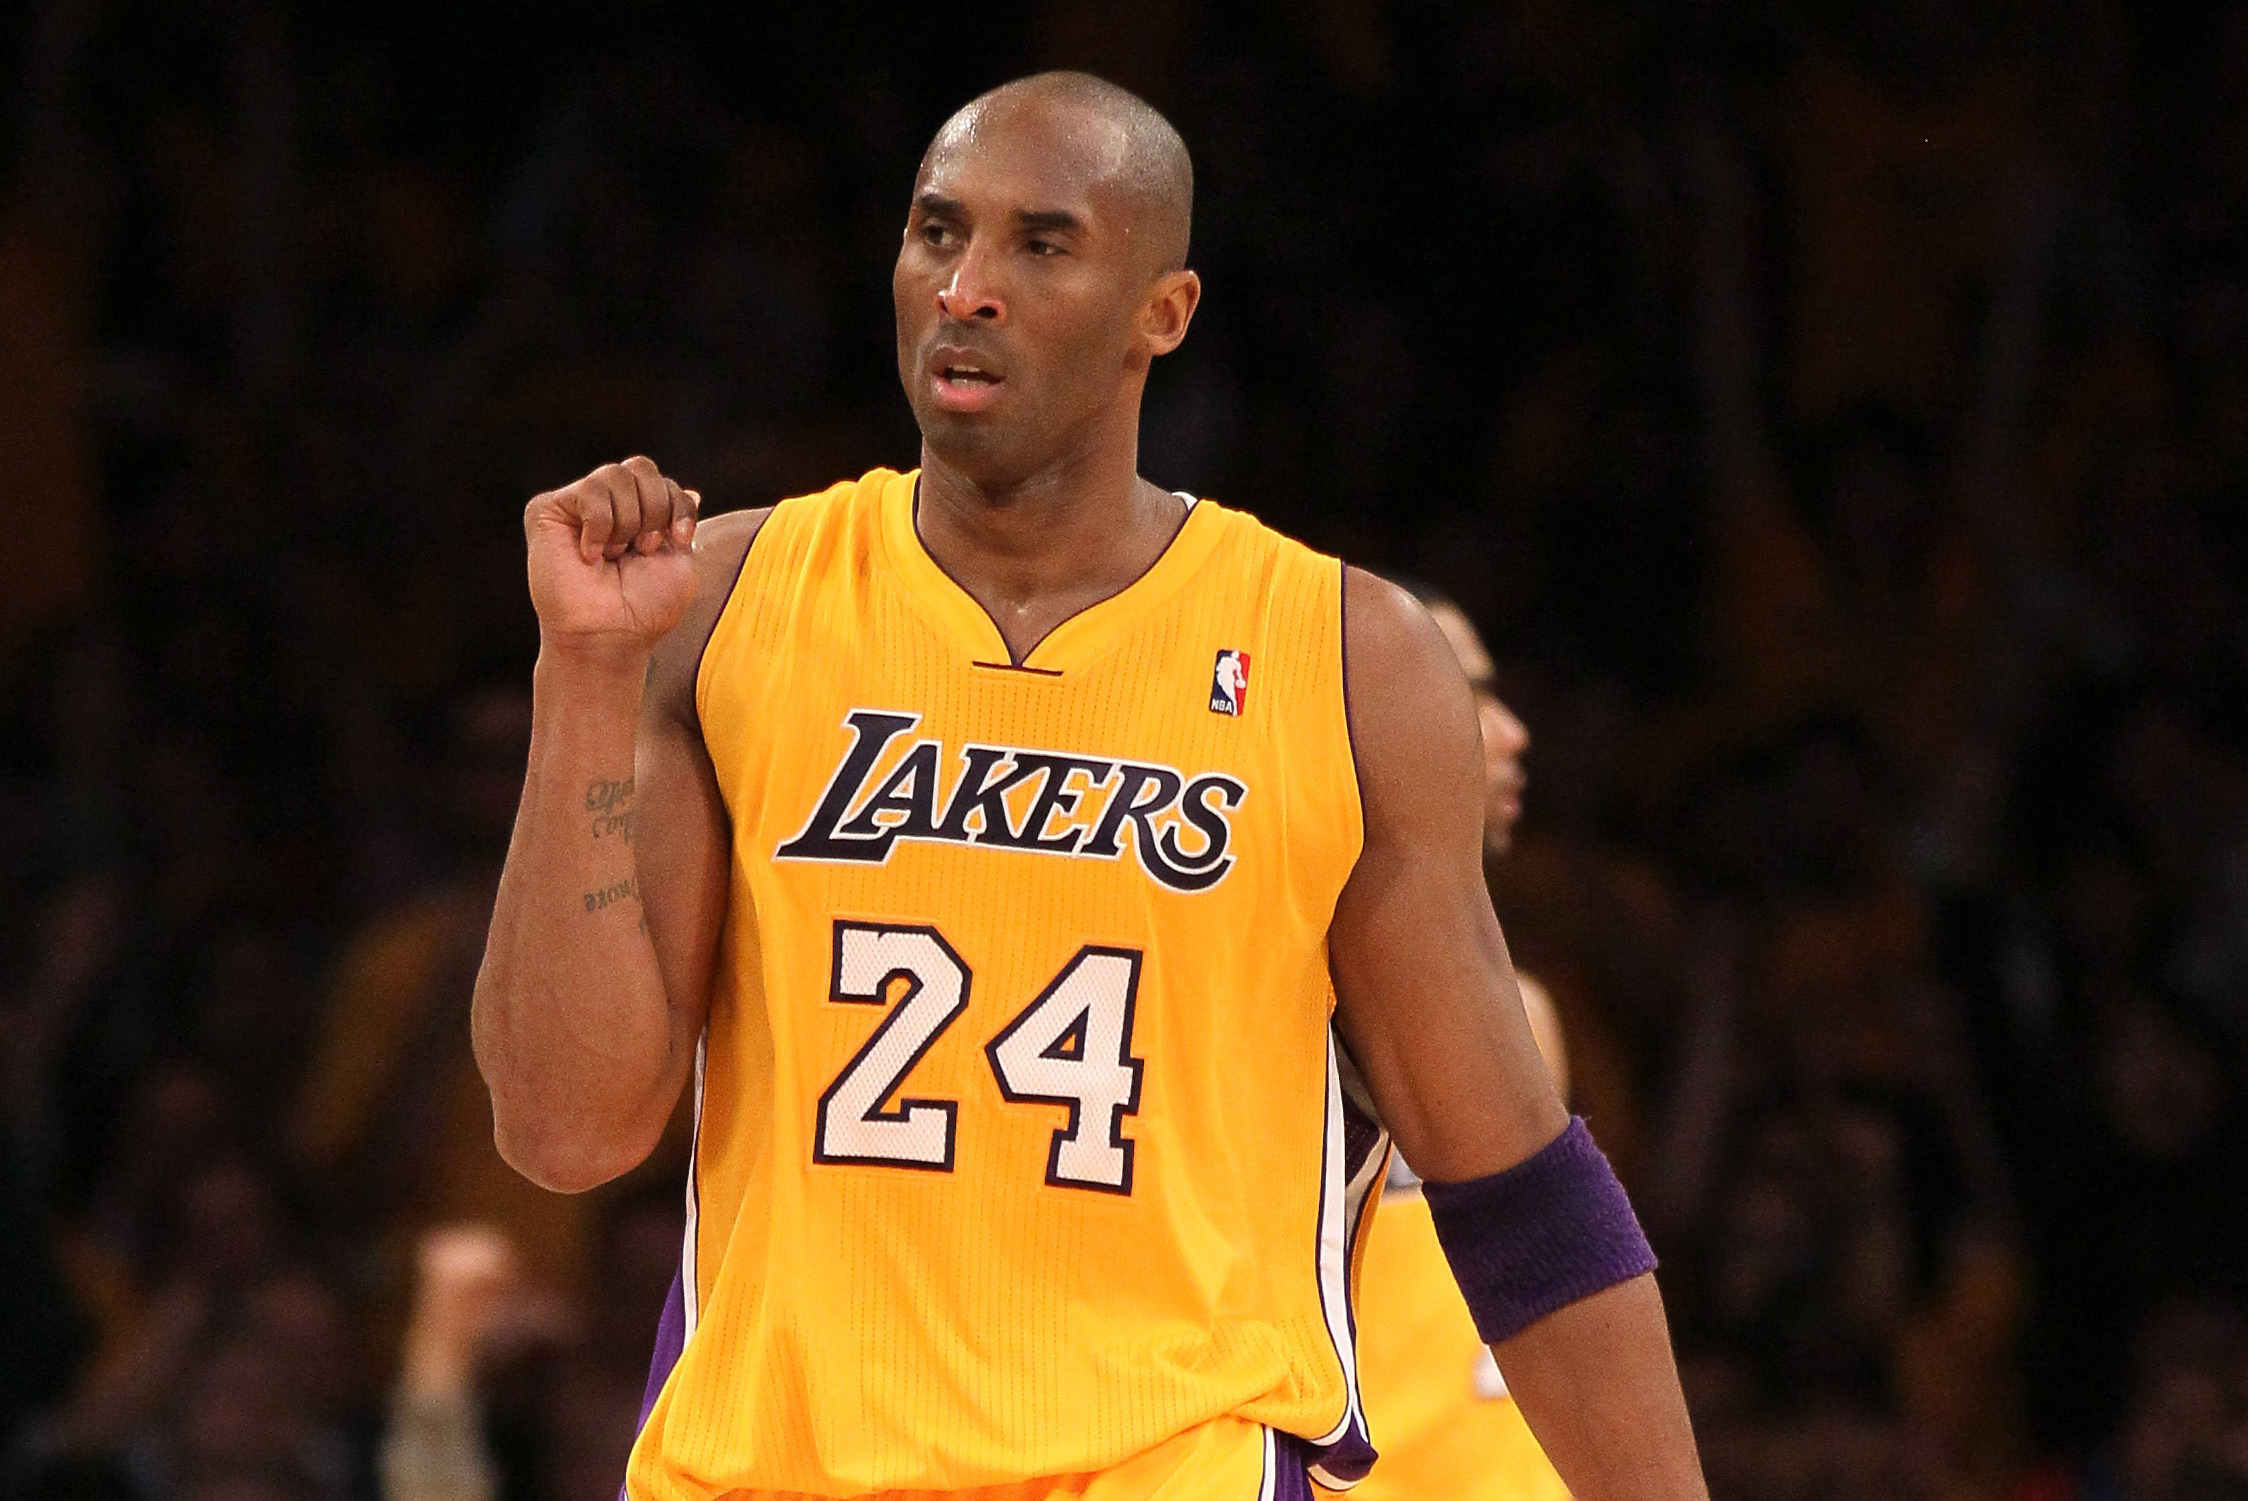 Kobe Bryant on jersey retirement: 'I'd probably force Shaq to do it